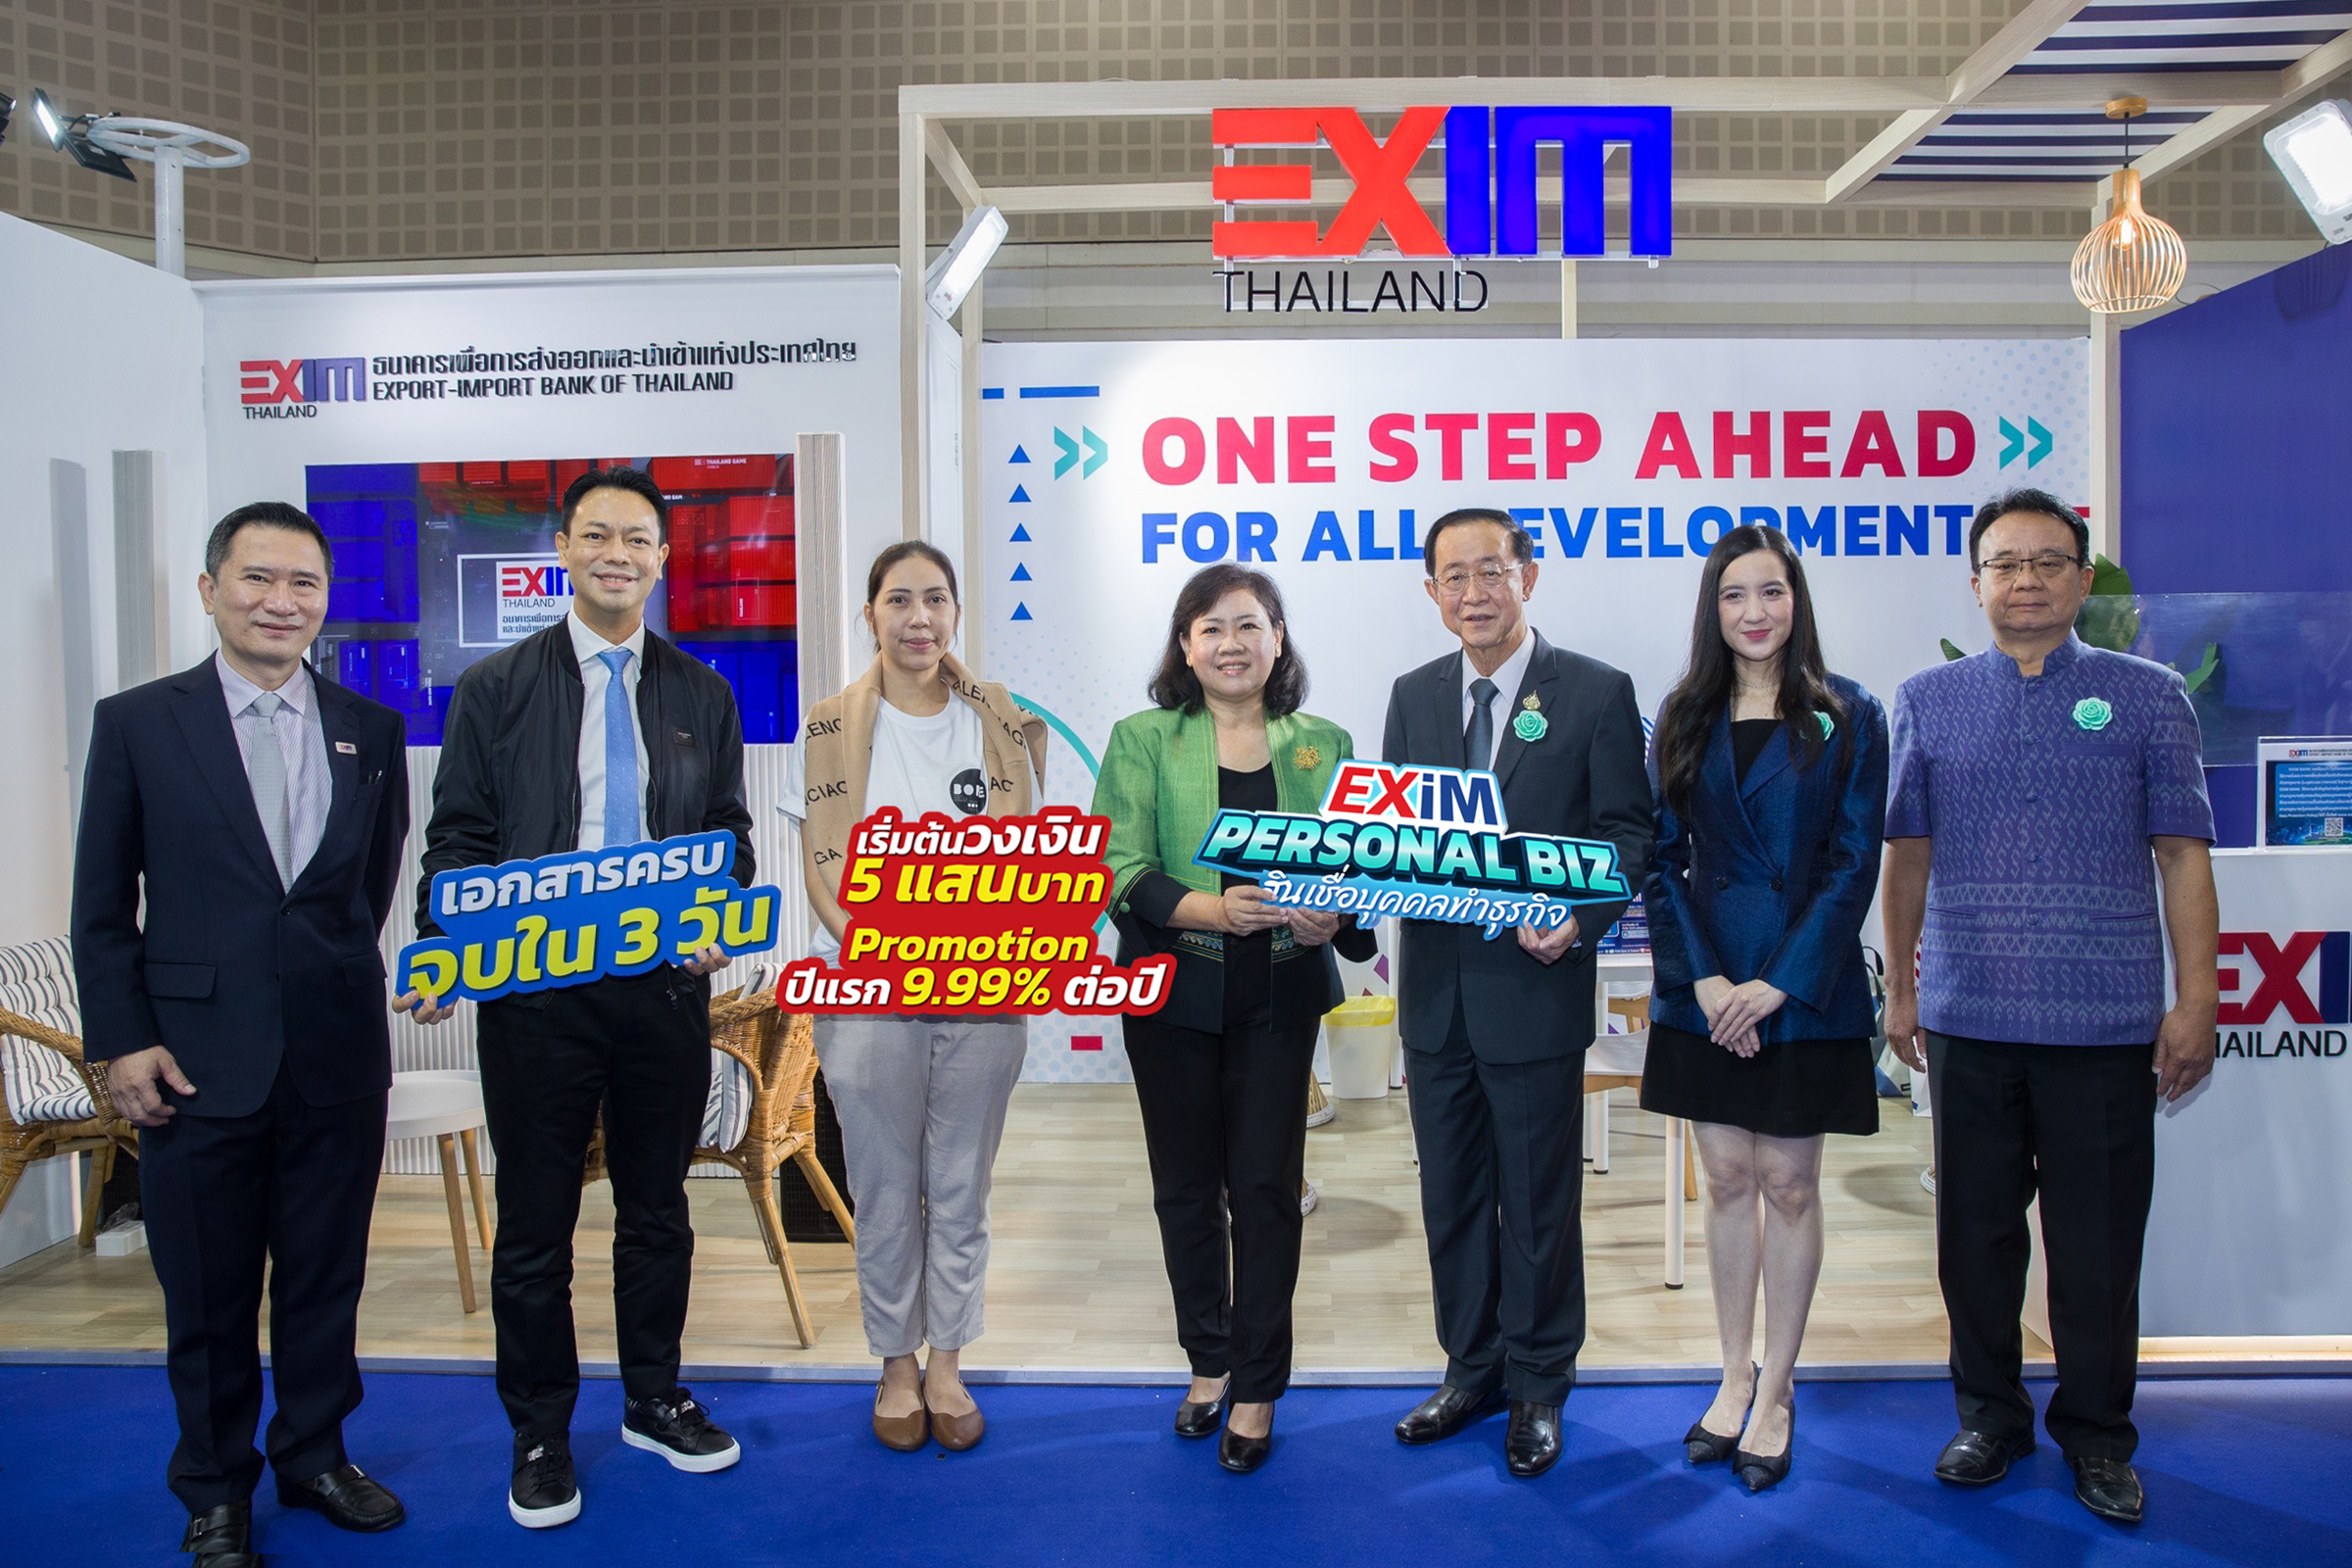 EXIM Thailand Launches EXIM Personal Biz Credit Scheme Reaffirming to Take One Step Ahead by Unlocking Small Business People to Start Export-related Businesses